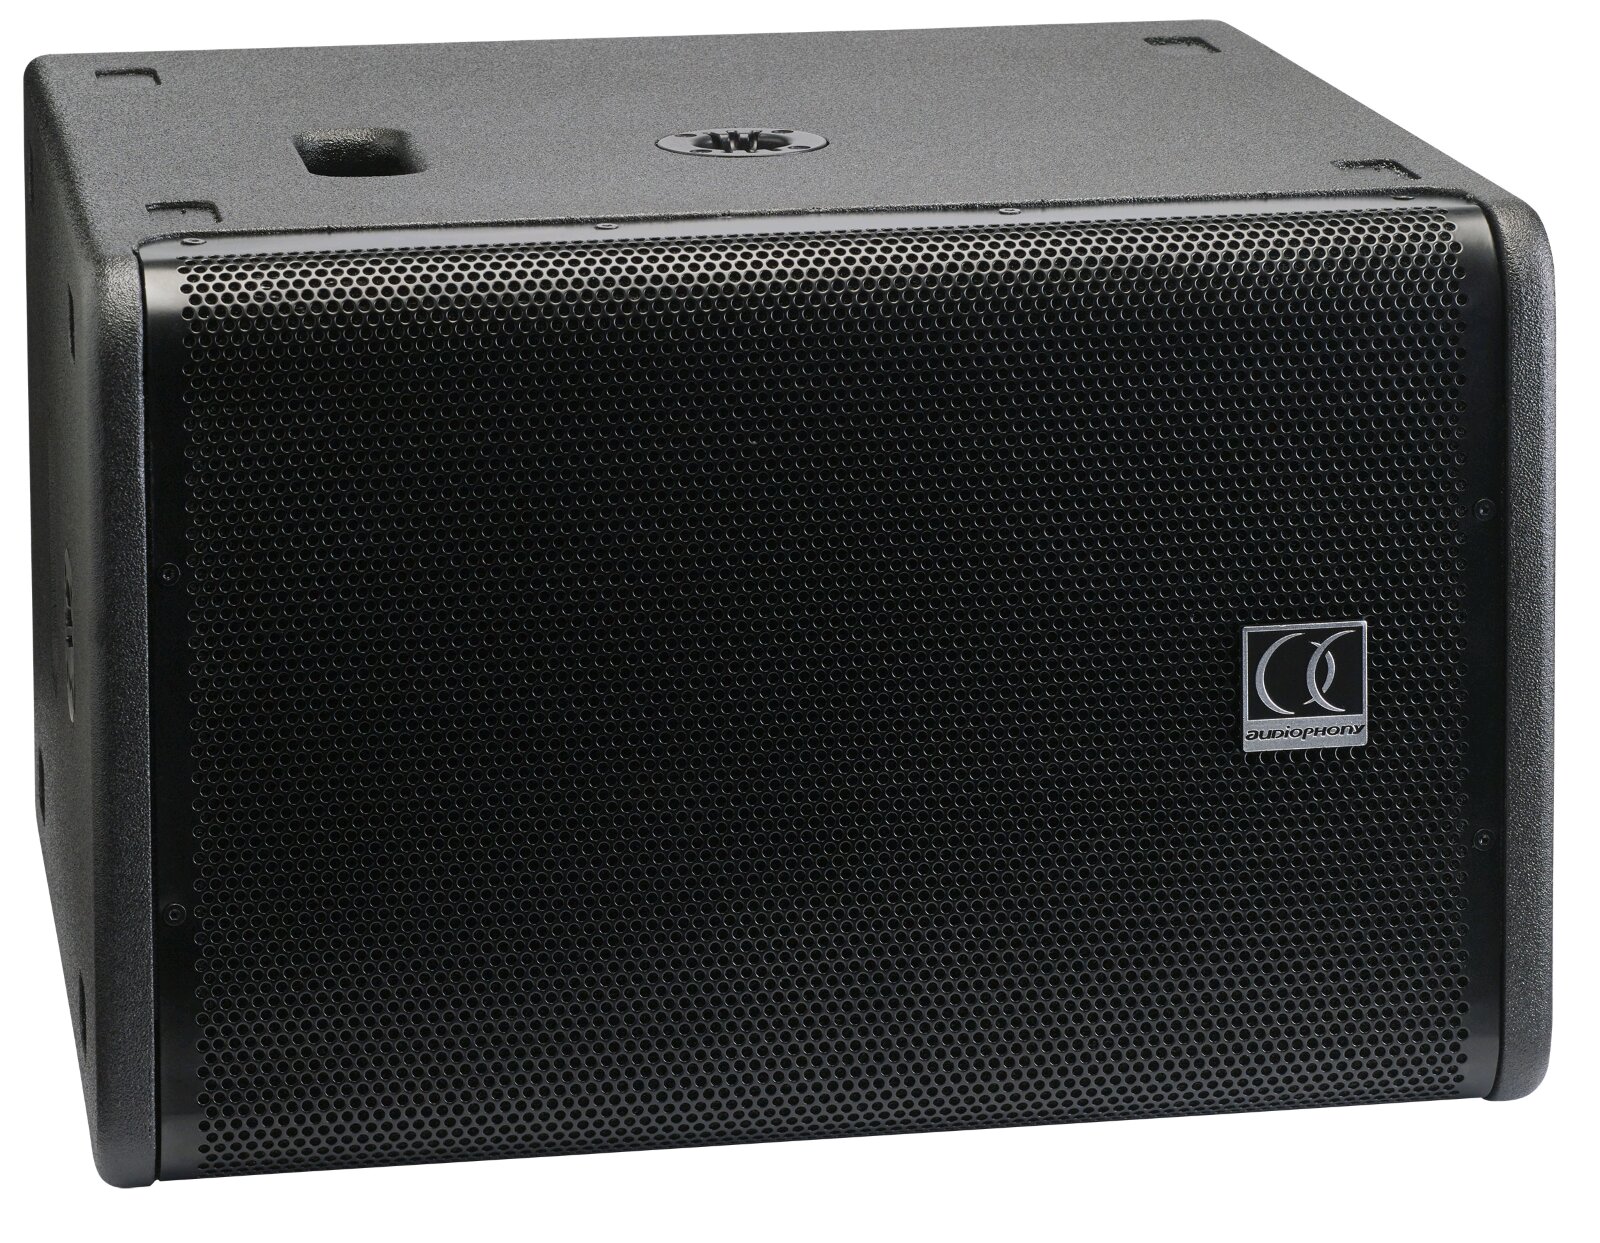 Audiophony iLINEsub12A Active 12-inch subwoofer 700W + 700W with integrated DSP : photo 1